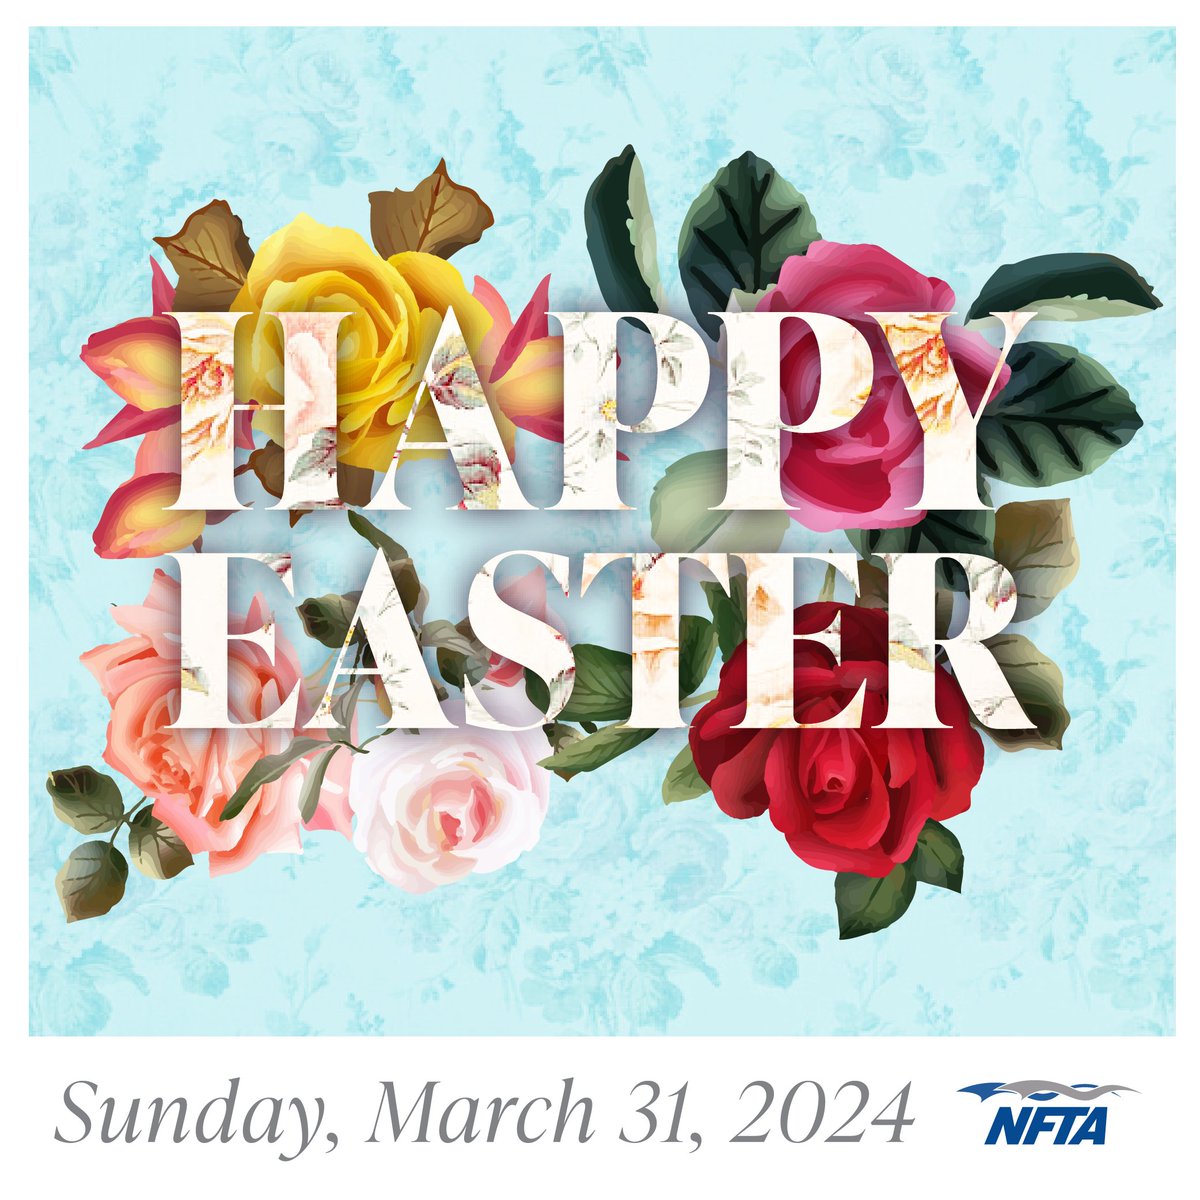 Happy Easter from the Niagara Frontier Transportation Authority! 🐣🌷🐰